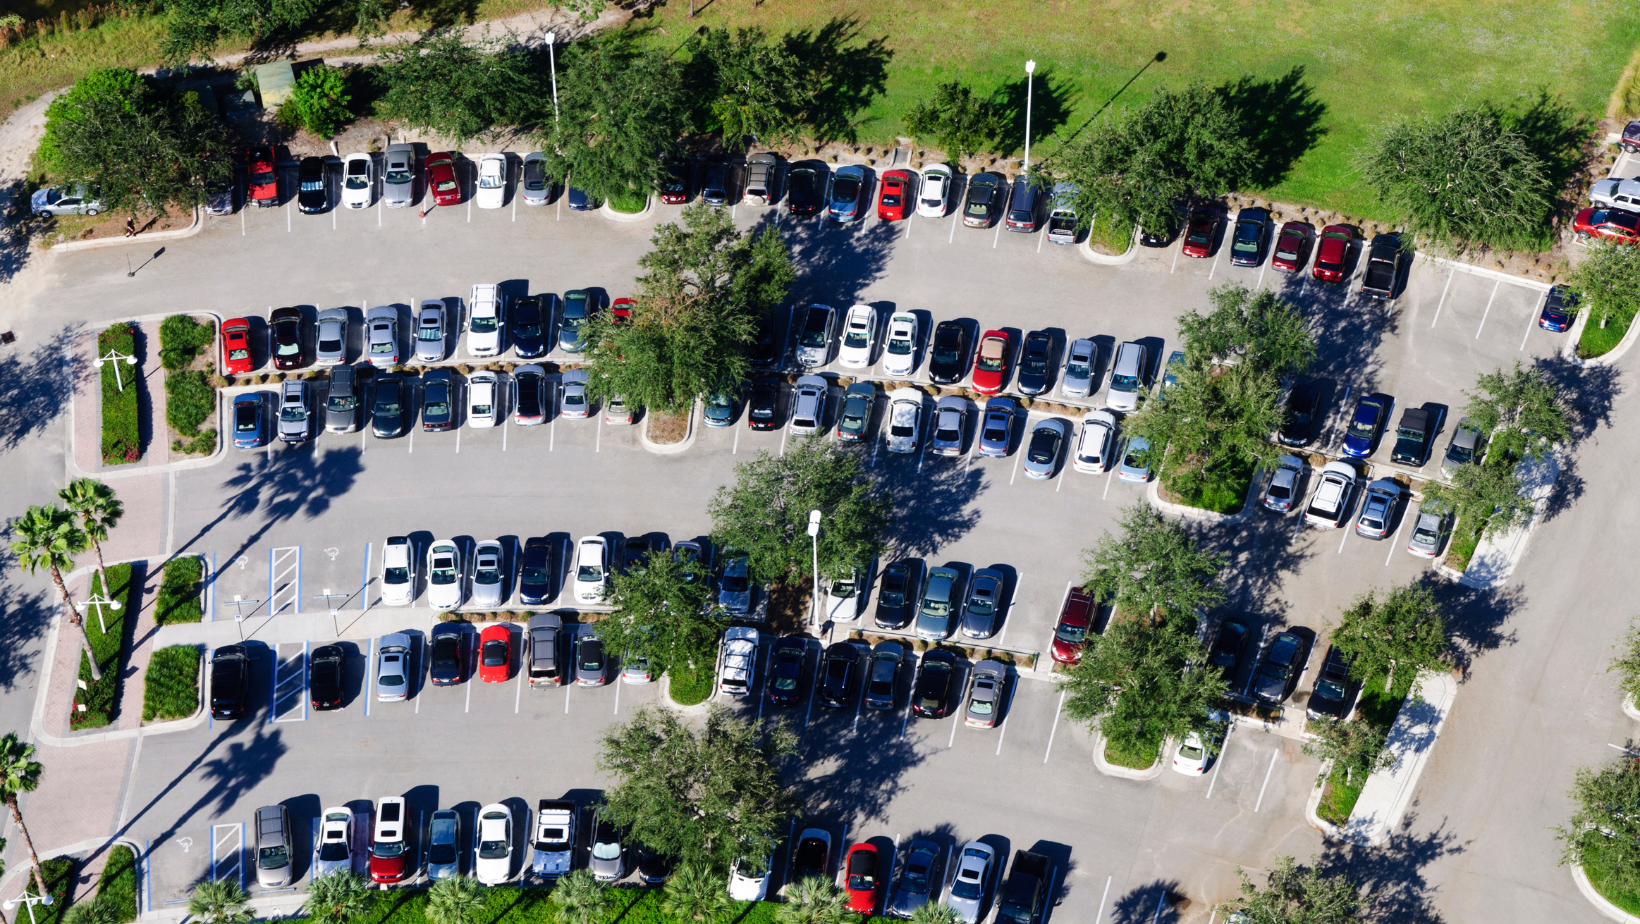 The key to remember in this debate is that eliminating parking minimums does not eliminate parking. 